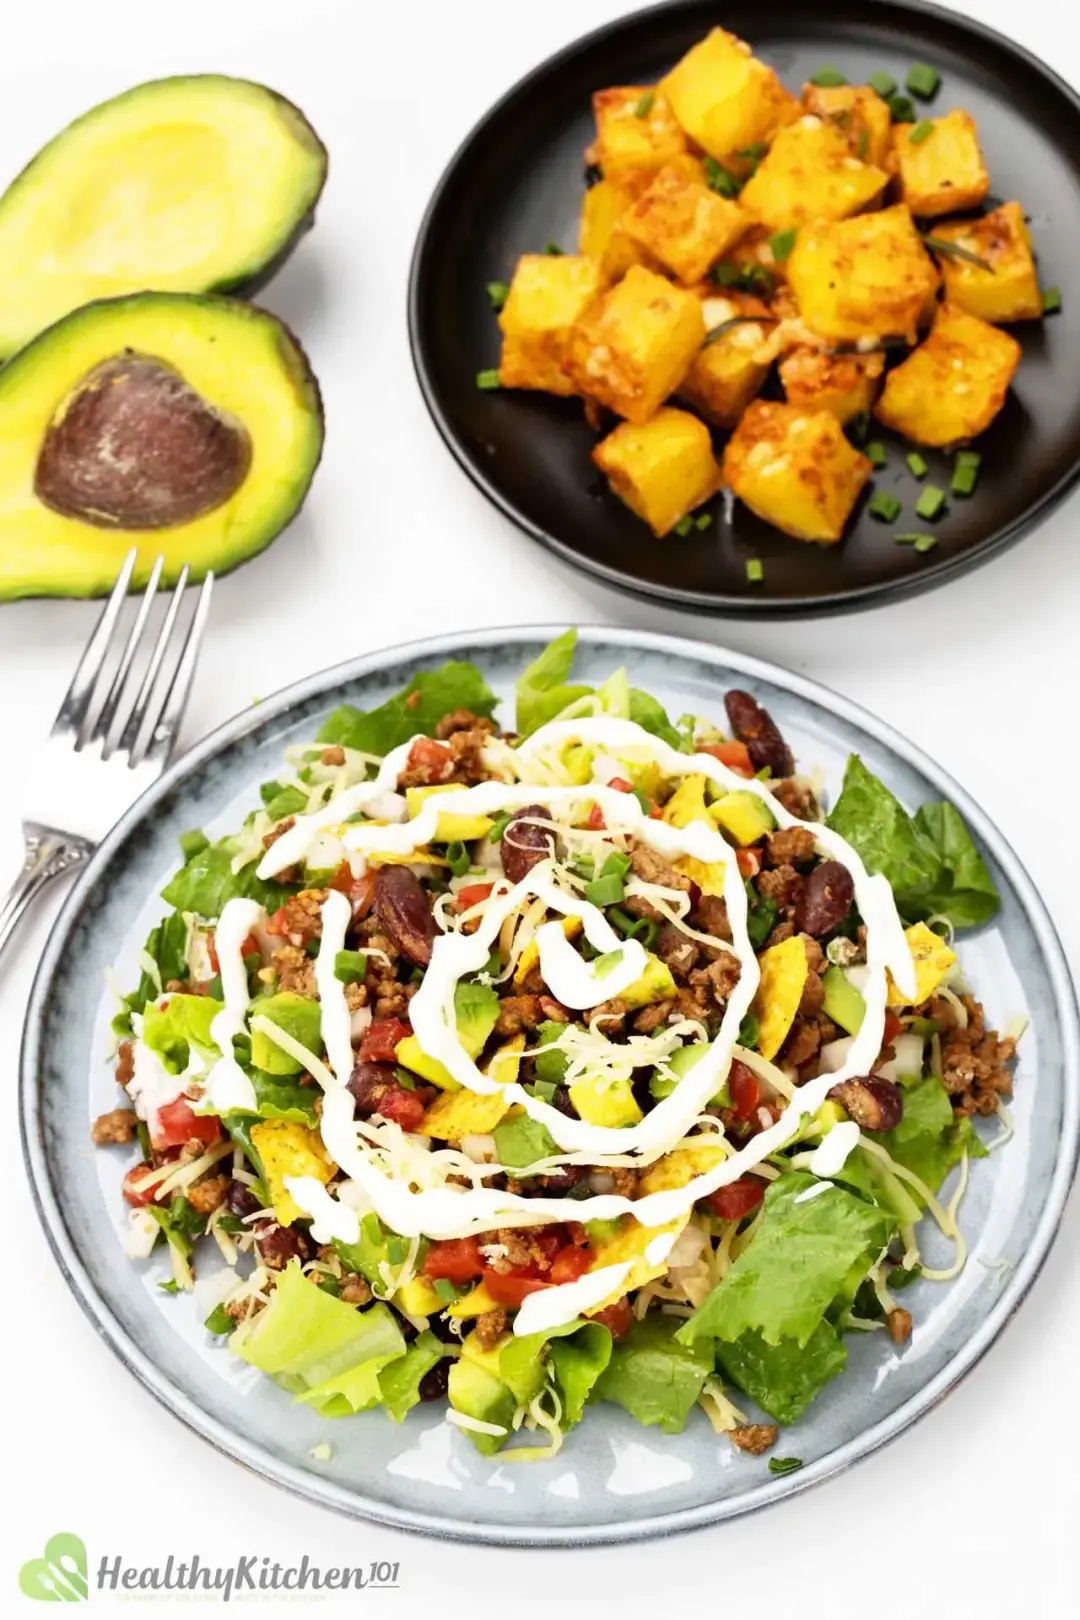 What to serve with taco salad